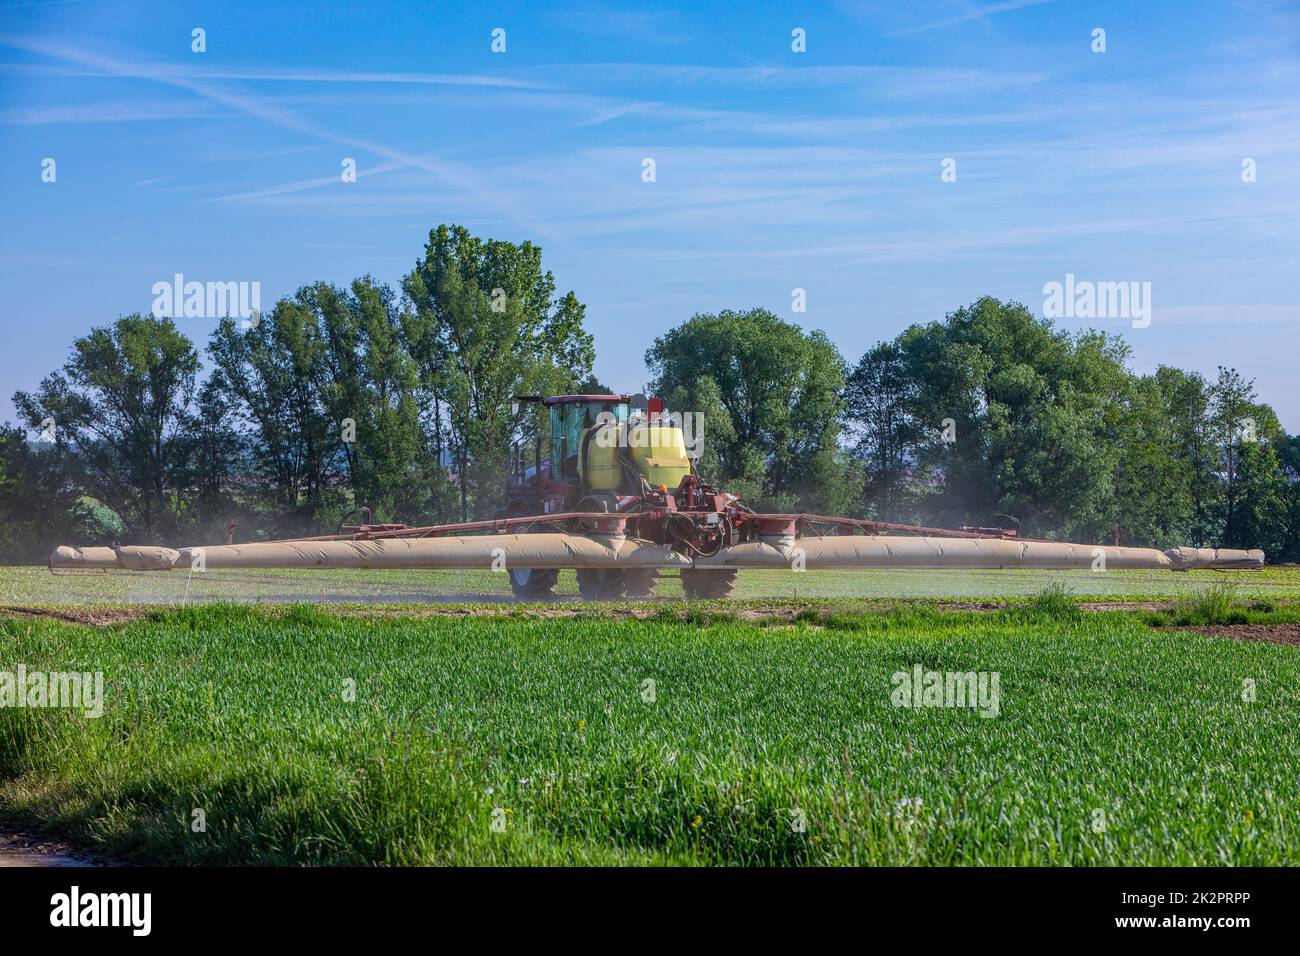 tractor spraying on a salad field outdoors Stock Photo